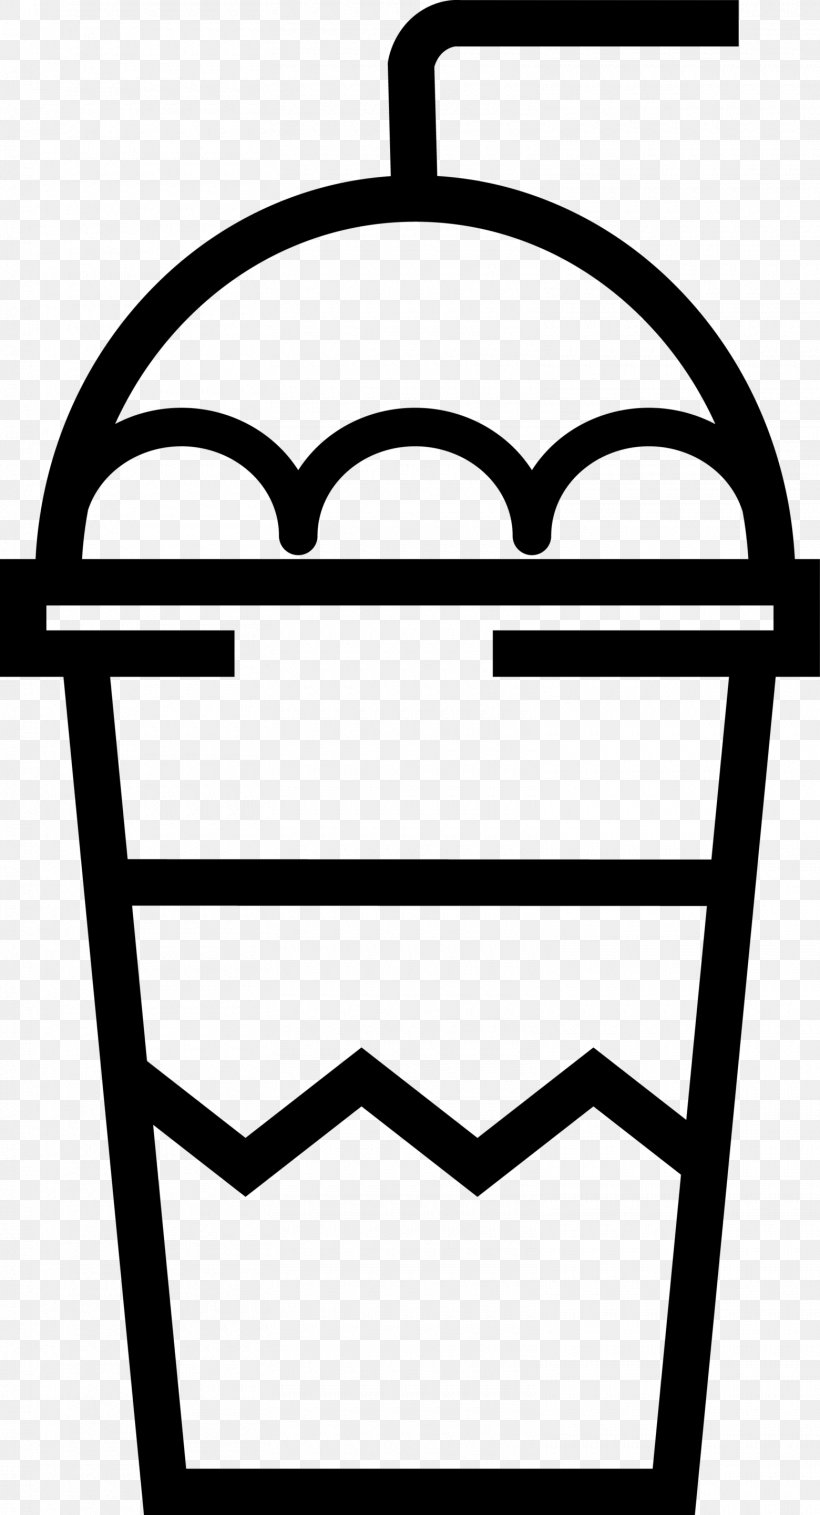 Frappuccino Clip Art, PNG, 1560x2884px, Frappuccino, Artwork, Black And White, Coffee, Digital Image Download Free